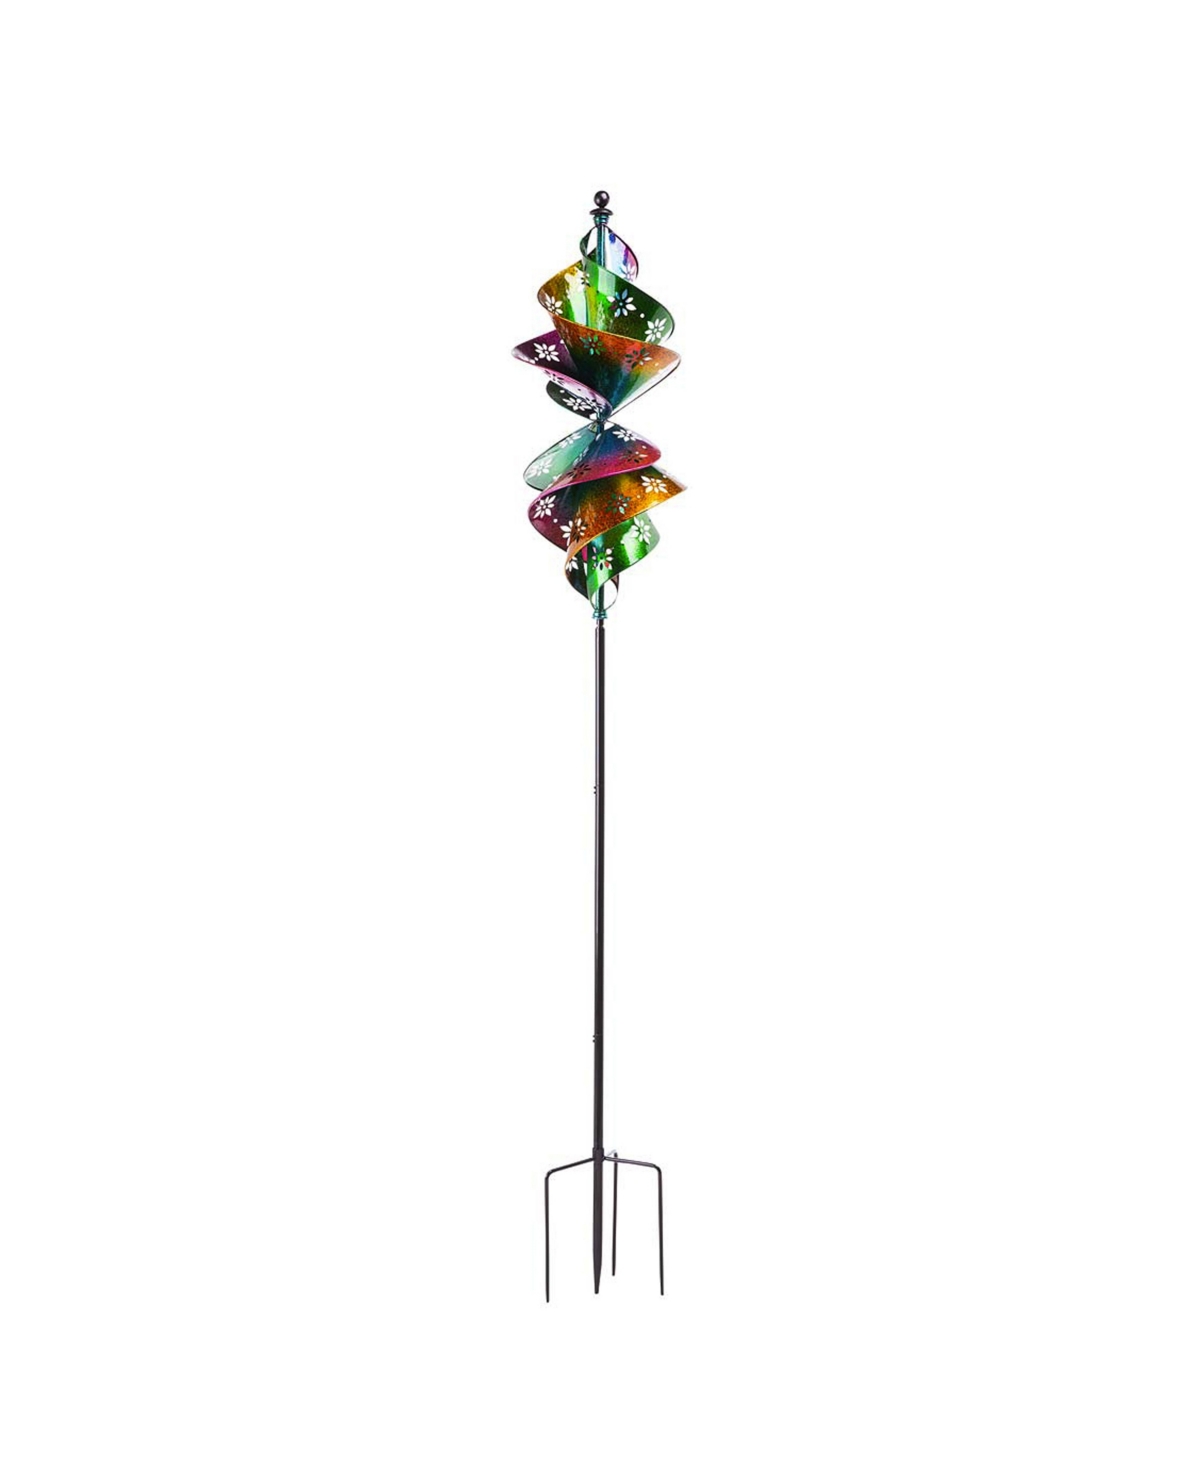 Colorful Vertical Spiral Metal Wind Spinner - Multicolored